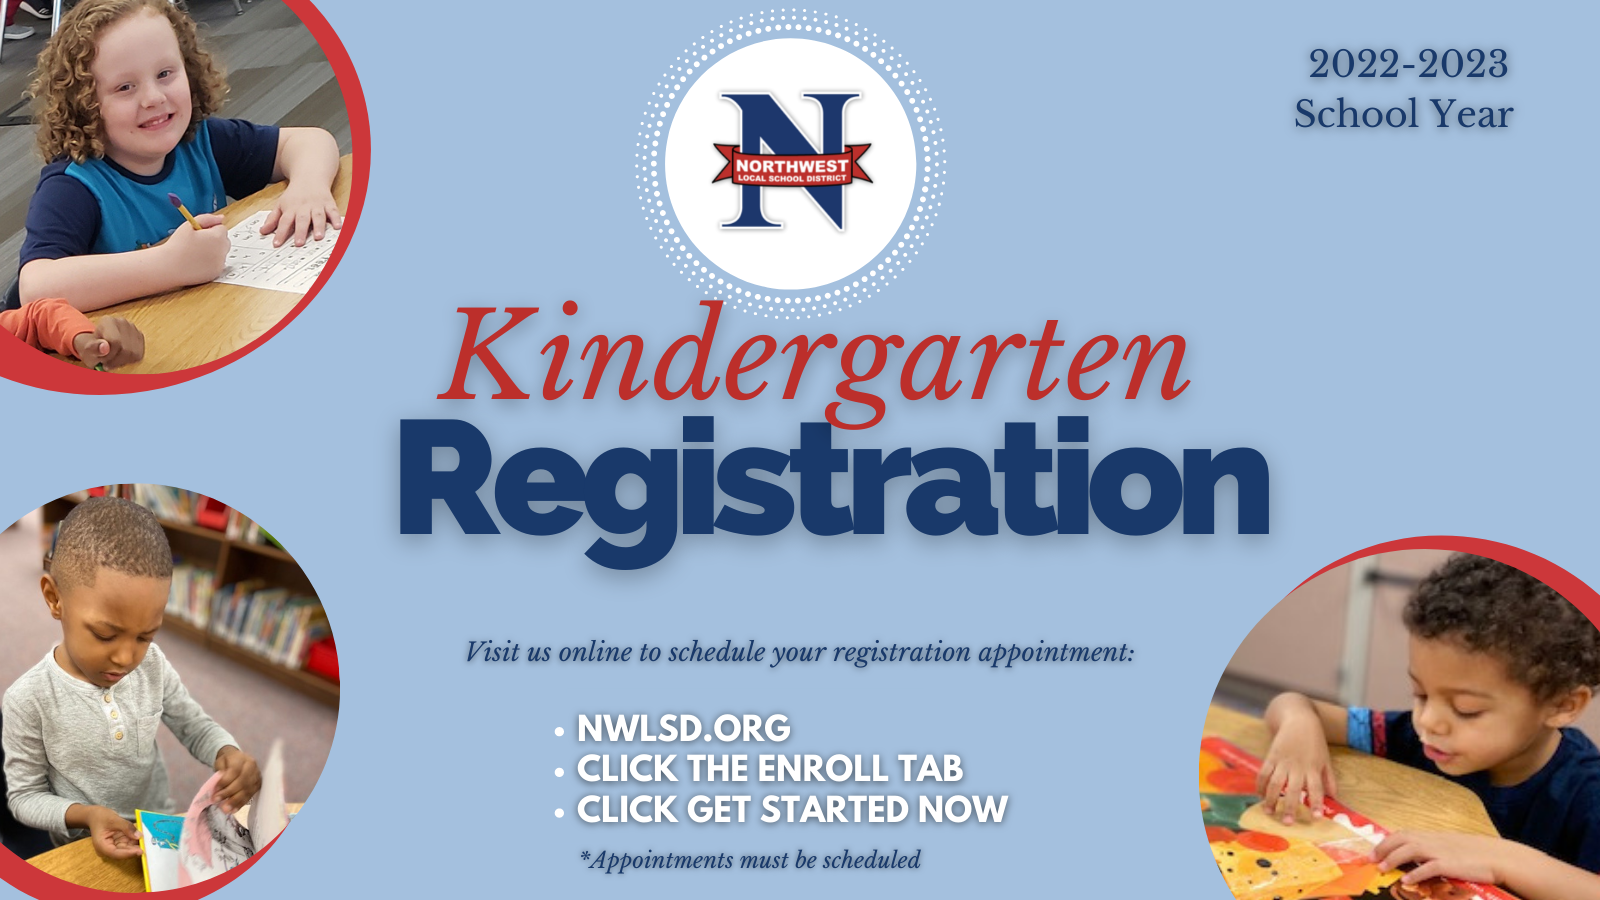 Northwest Local School District Kindergarten Registration Visit us online to schedule your registration appointment. 2022-2023 school year. NWLSD.org, click the enroll tab, click get started now *appointments must be scheduled. 